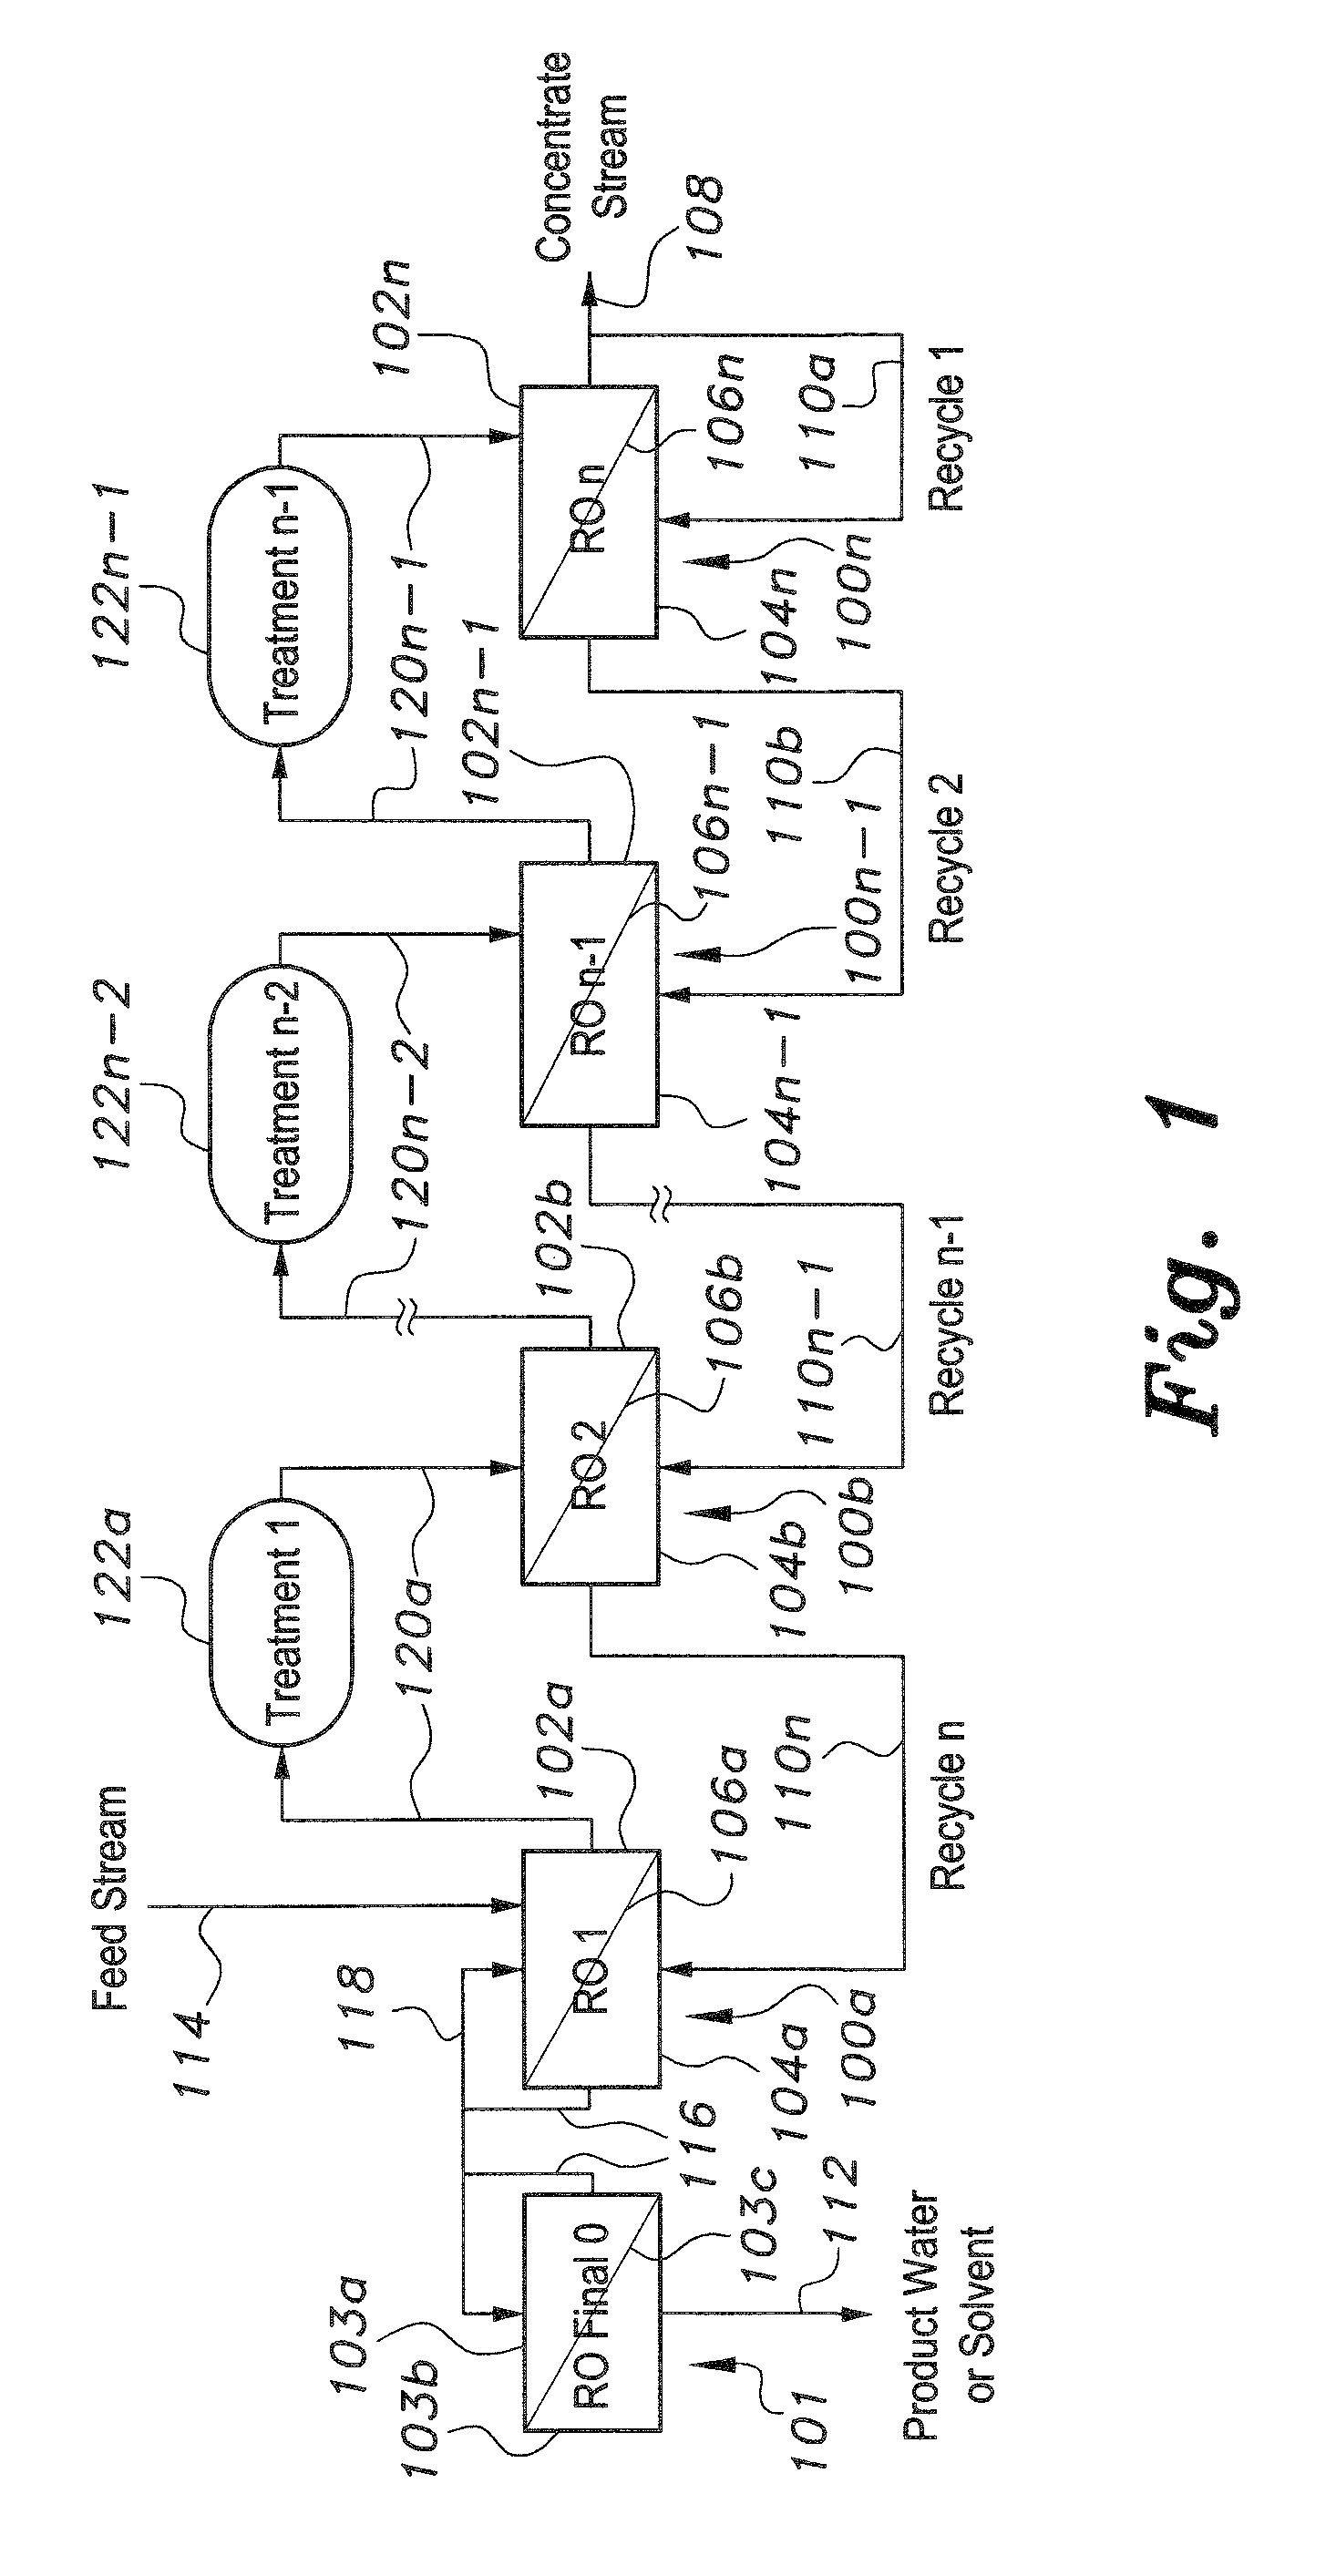 Method of solvent recovery from a dilute solution